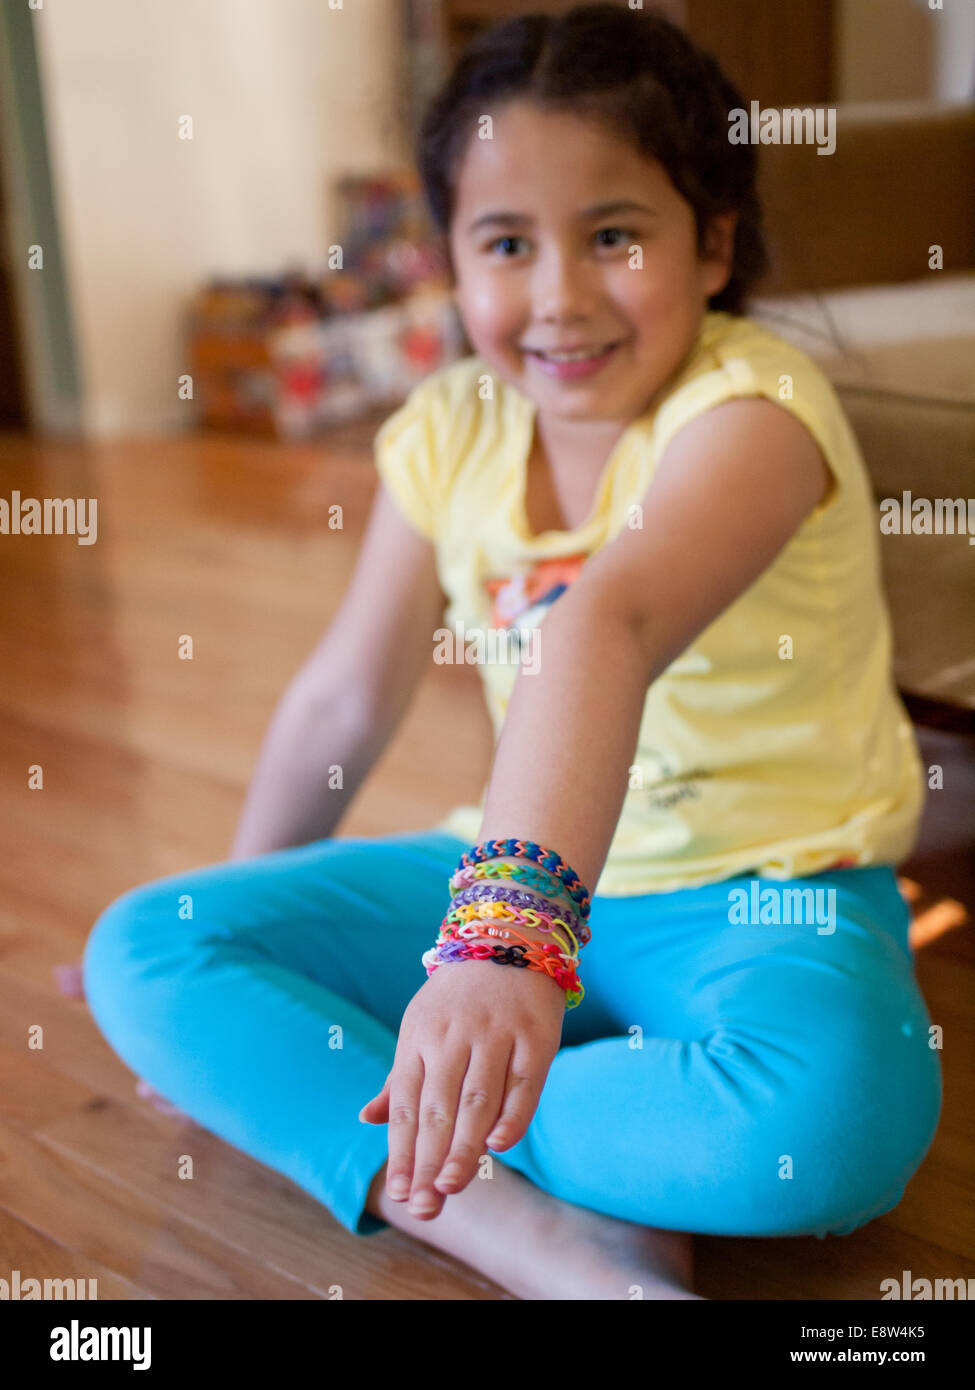 A cute little girl shows off her colourful Rainbow loom bracelets. Stock Photo